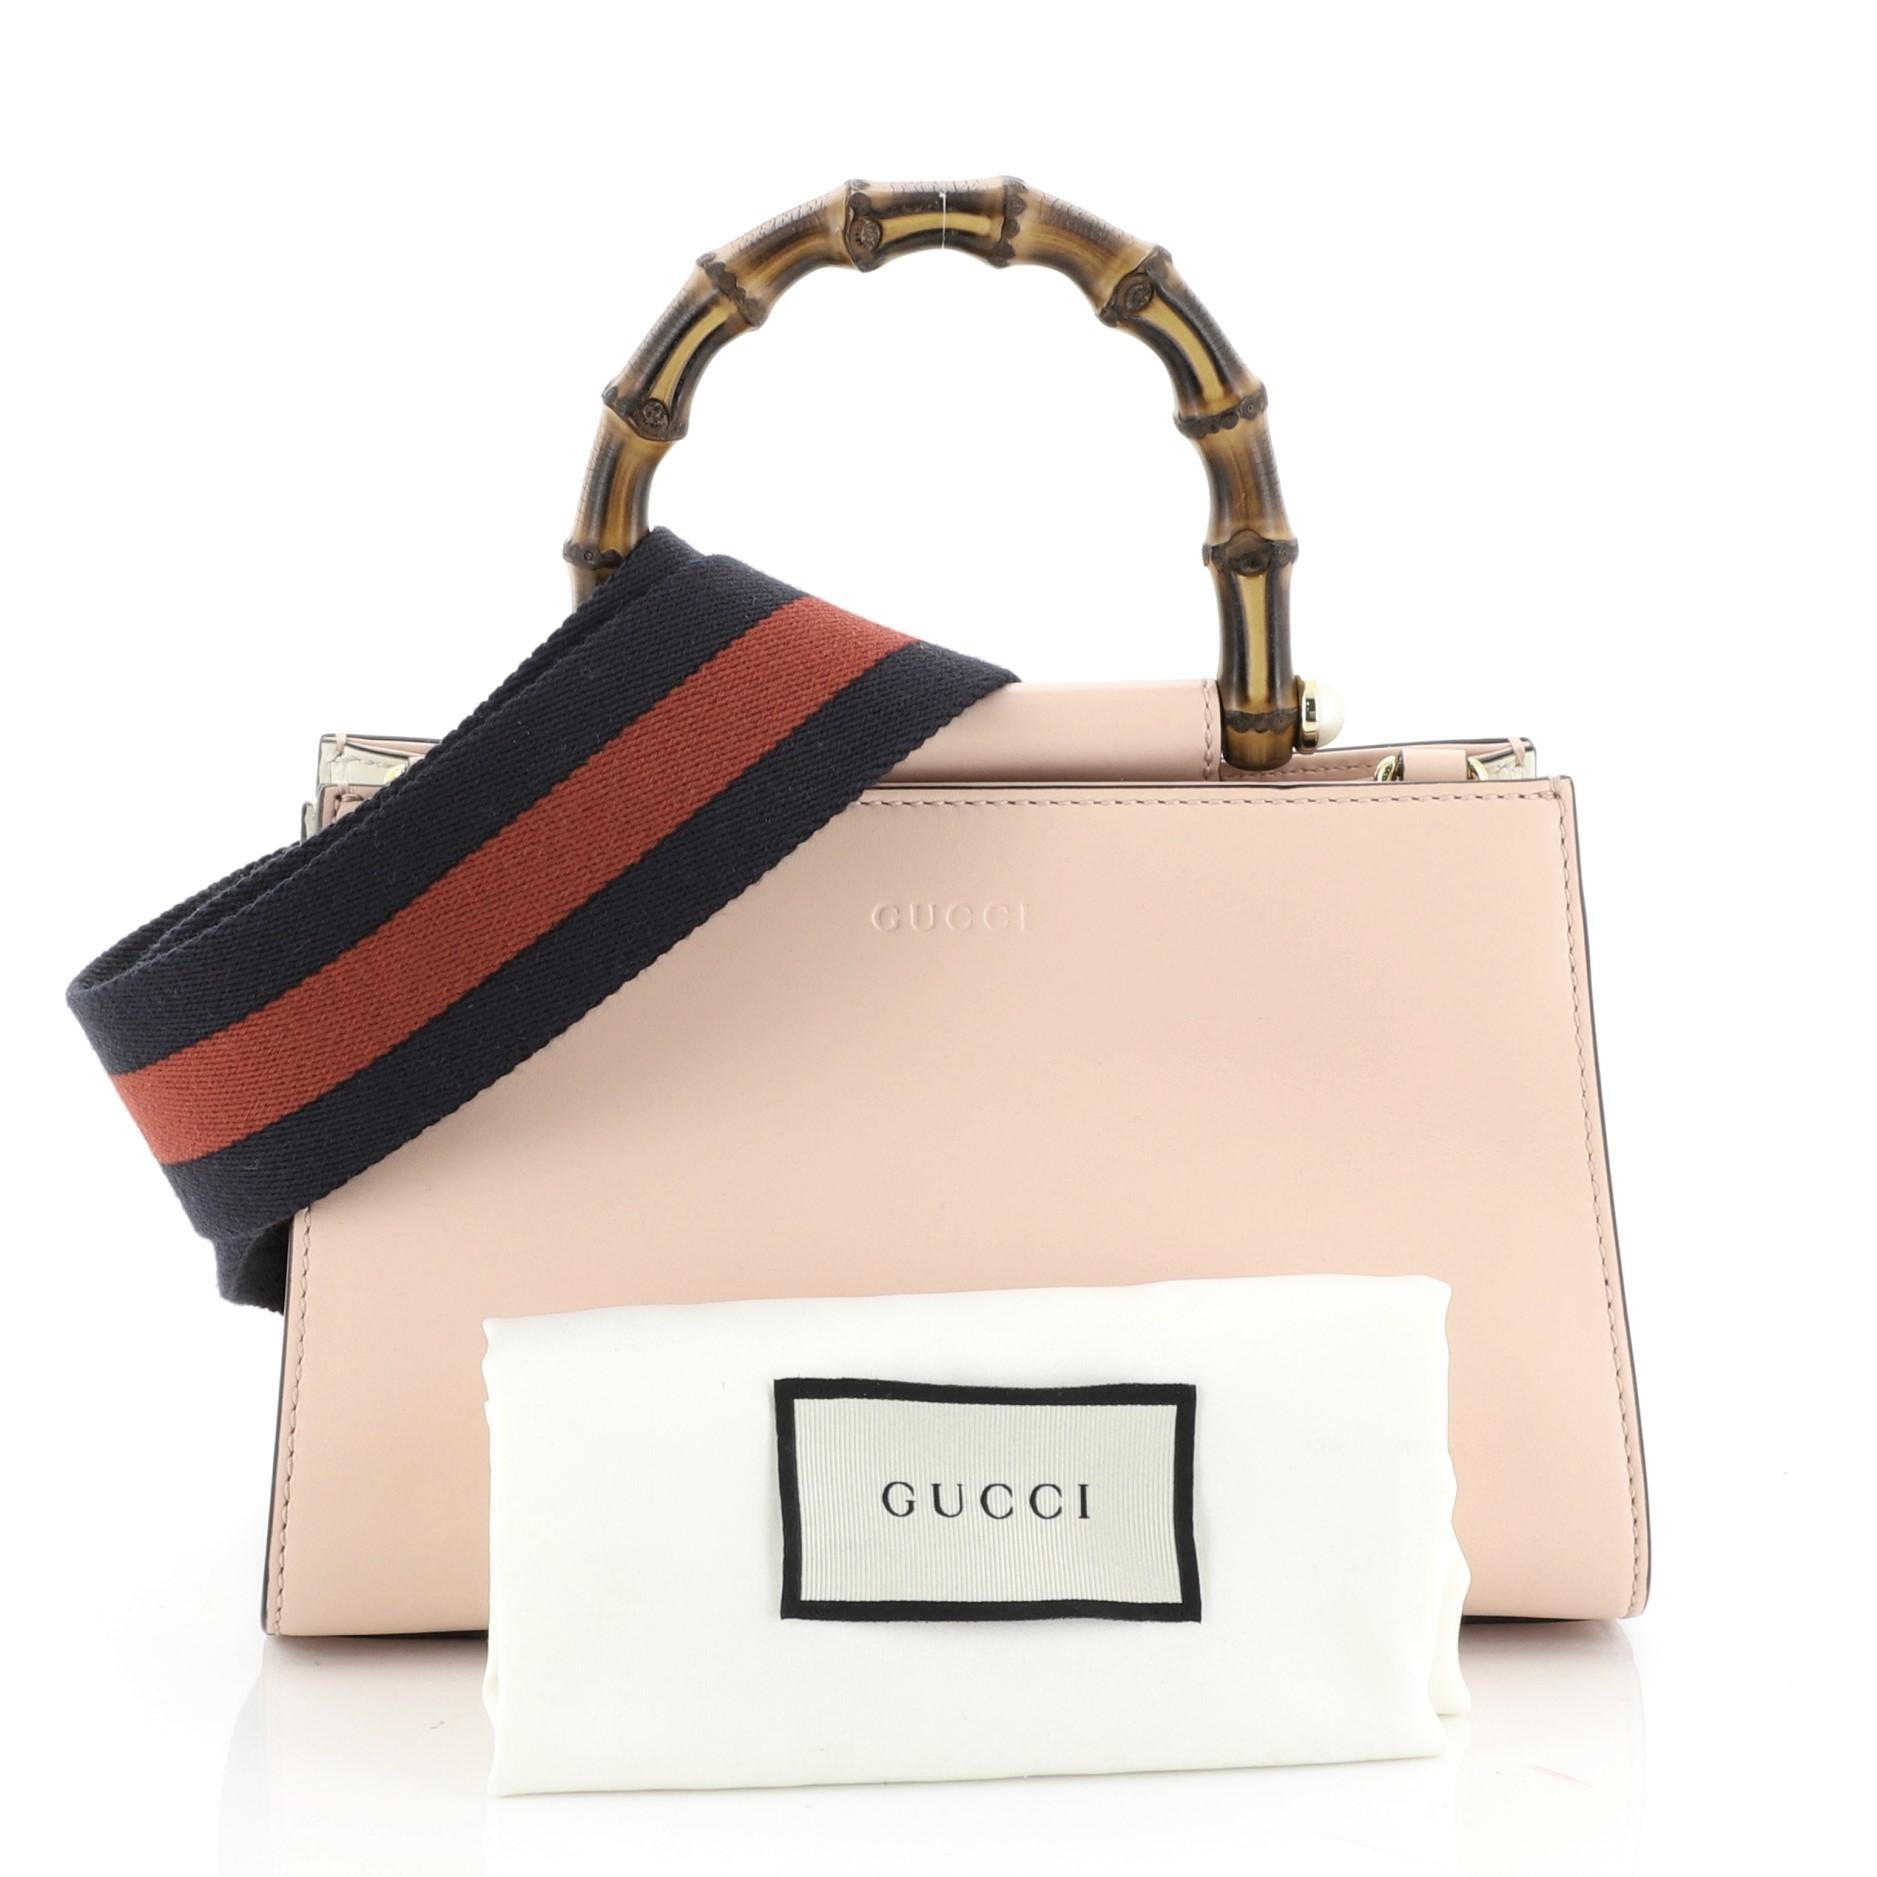 This Gucci Nymphaea Top Handle Bag Leather Mini, crafted in pink leather, features a bamboo handle with pearls and gold-tone hardware. Its magnetic snap closure opens to a gray microfiber interior with zip and slip pockets. 

Estimated Retail Price: